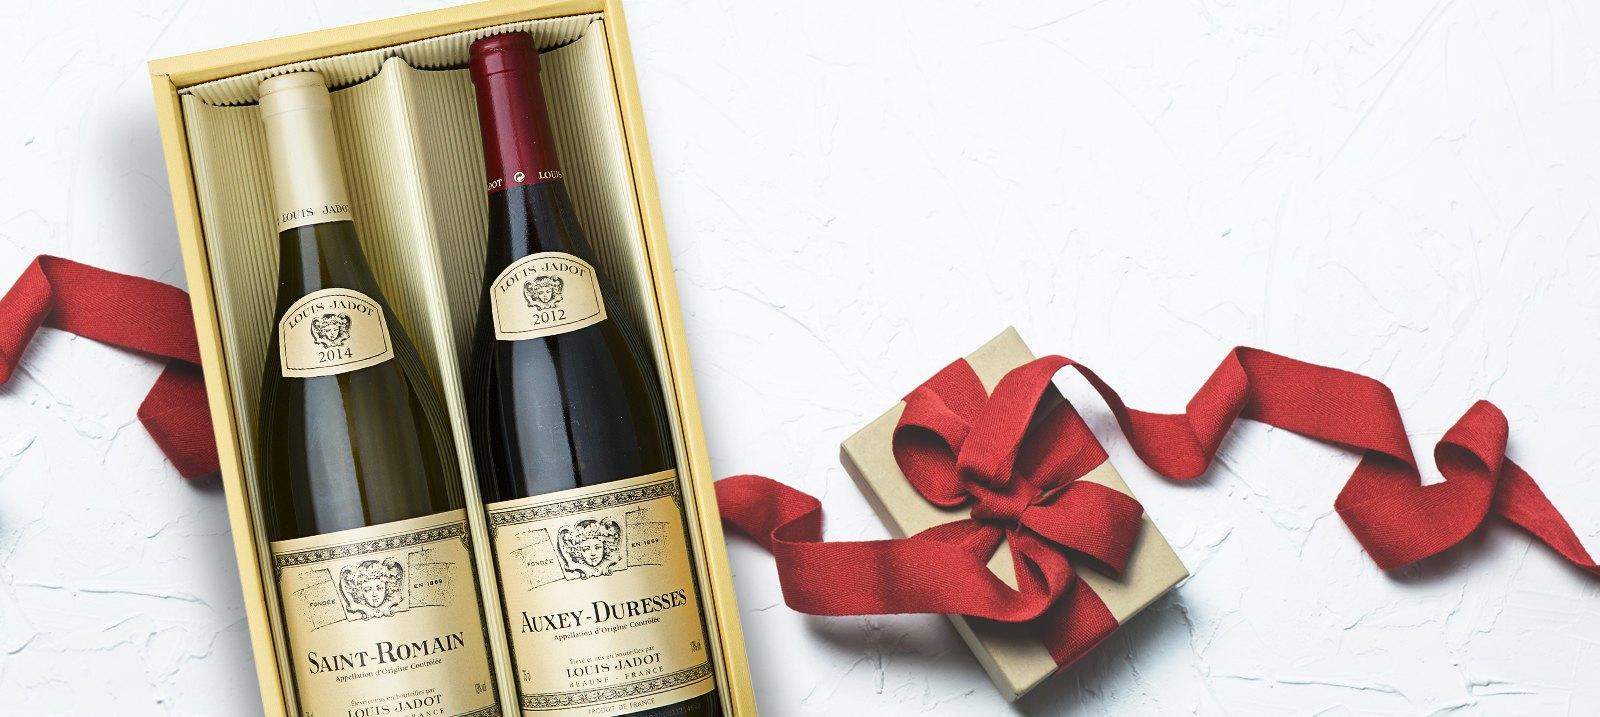 Louis Jadot for Gift